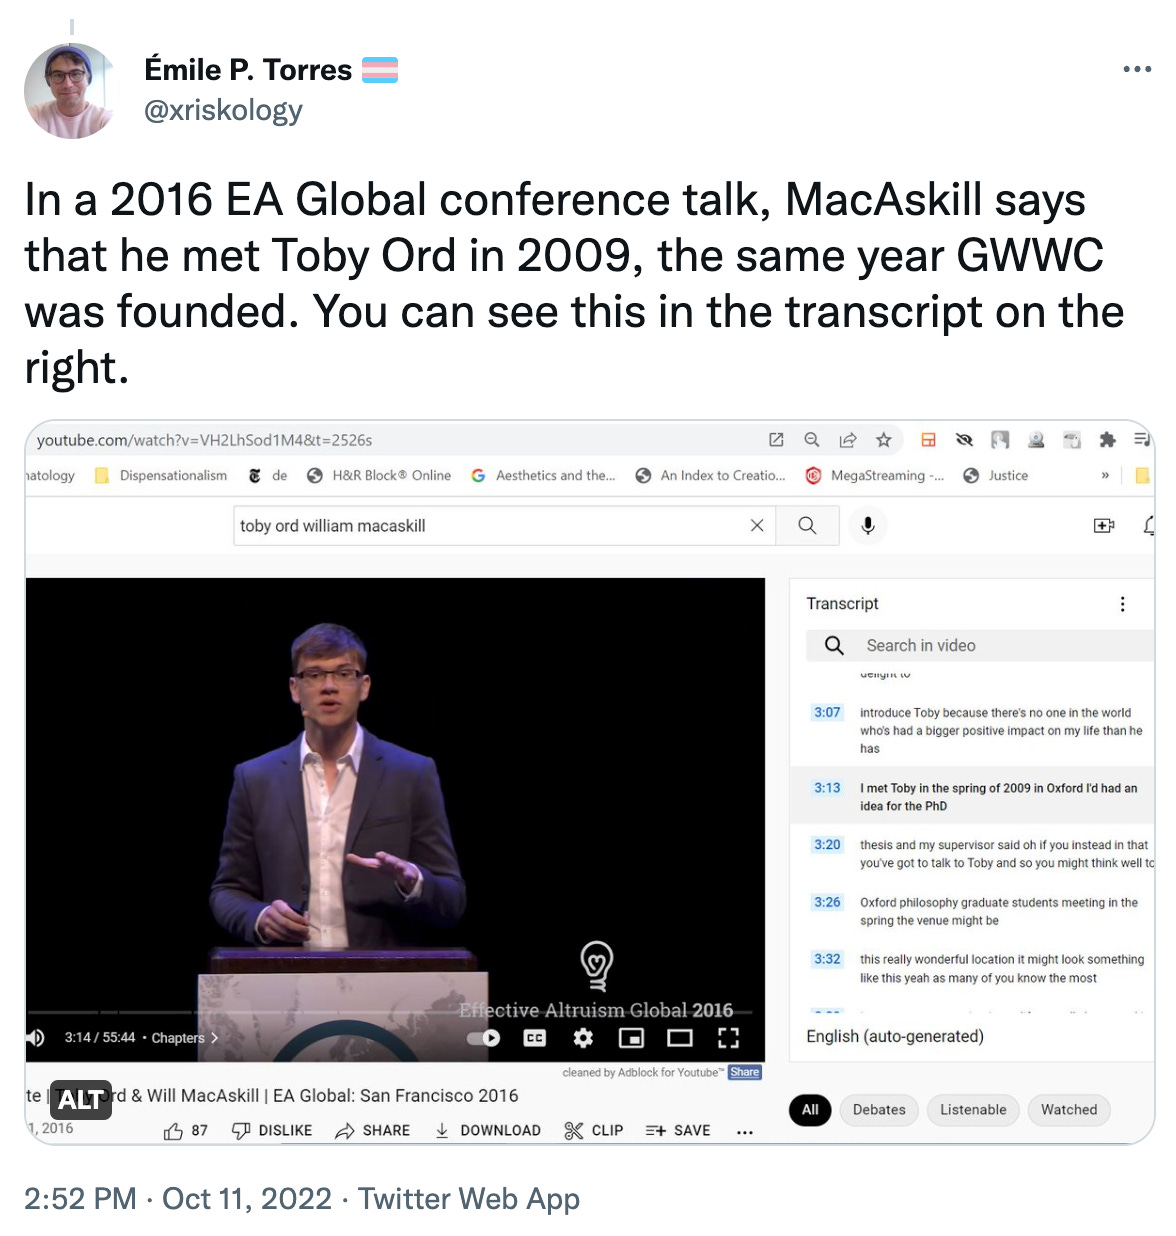 Émile P. Torres: In a 2016 EA Global conference talk, MacAskill says that he met Toby Ord in 2009, the same year GWWC was founded. You can see this in the transcript on the right.